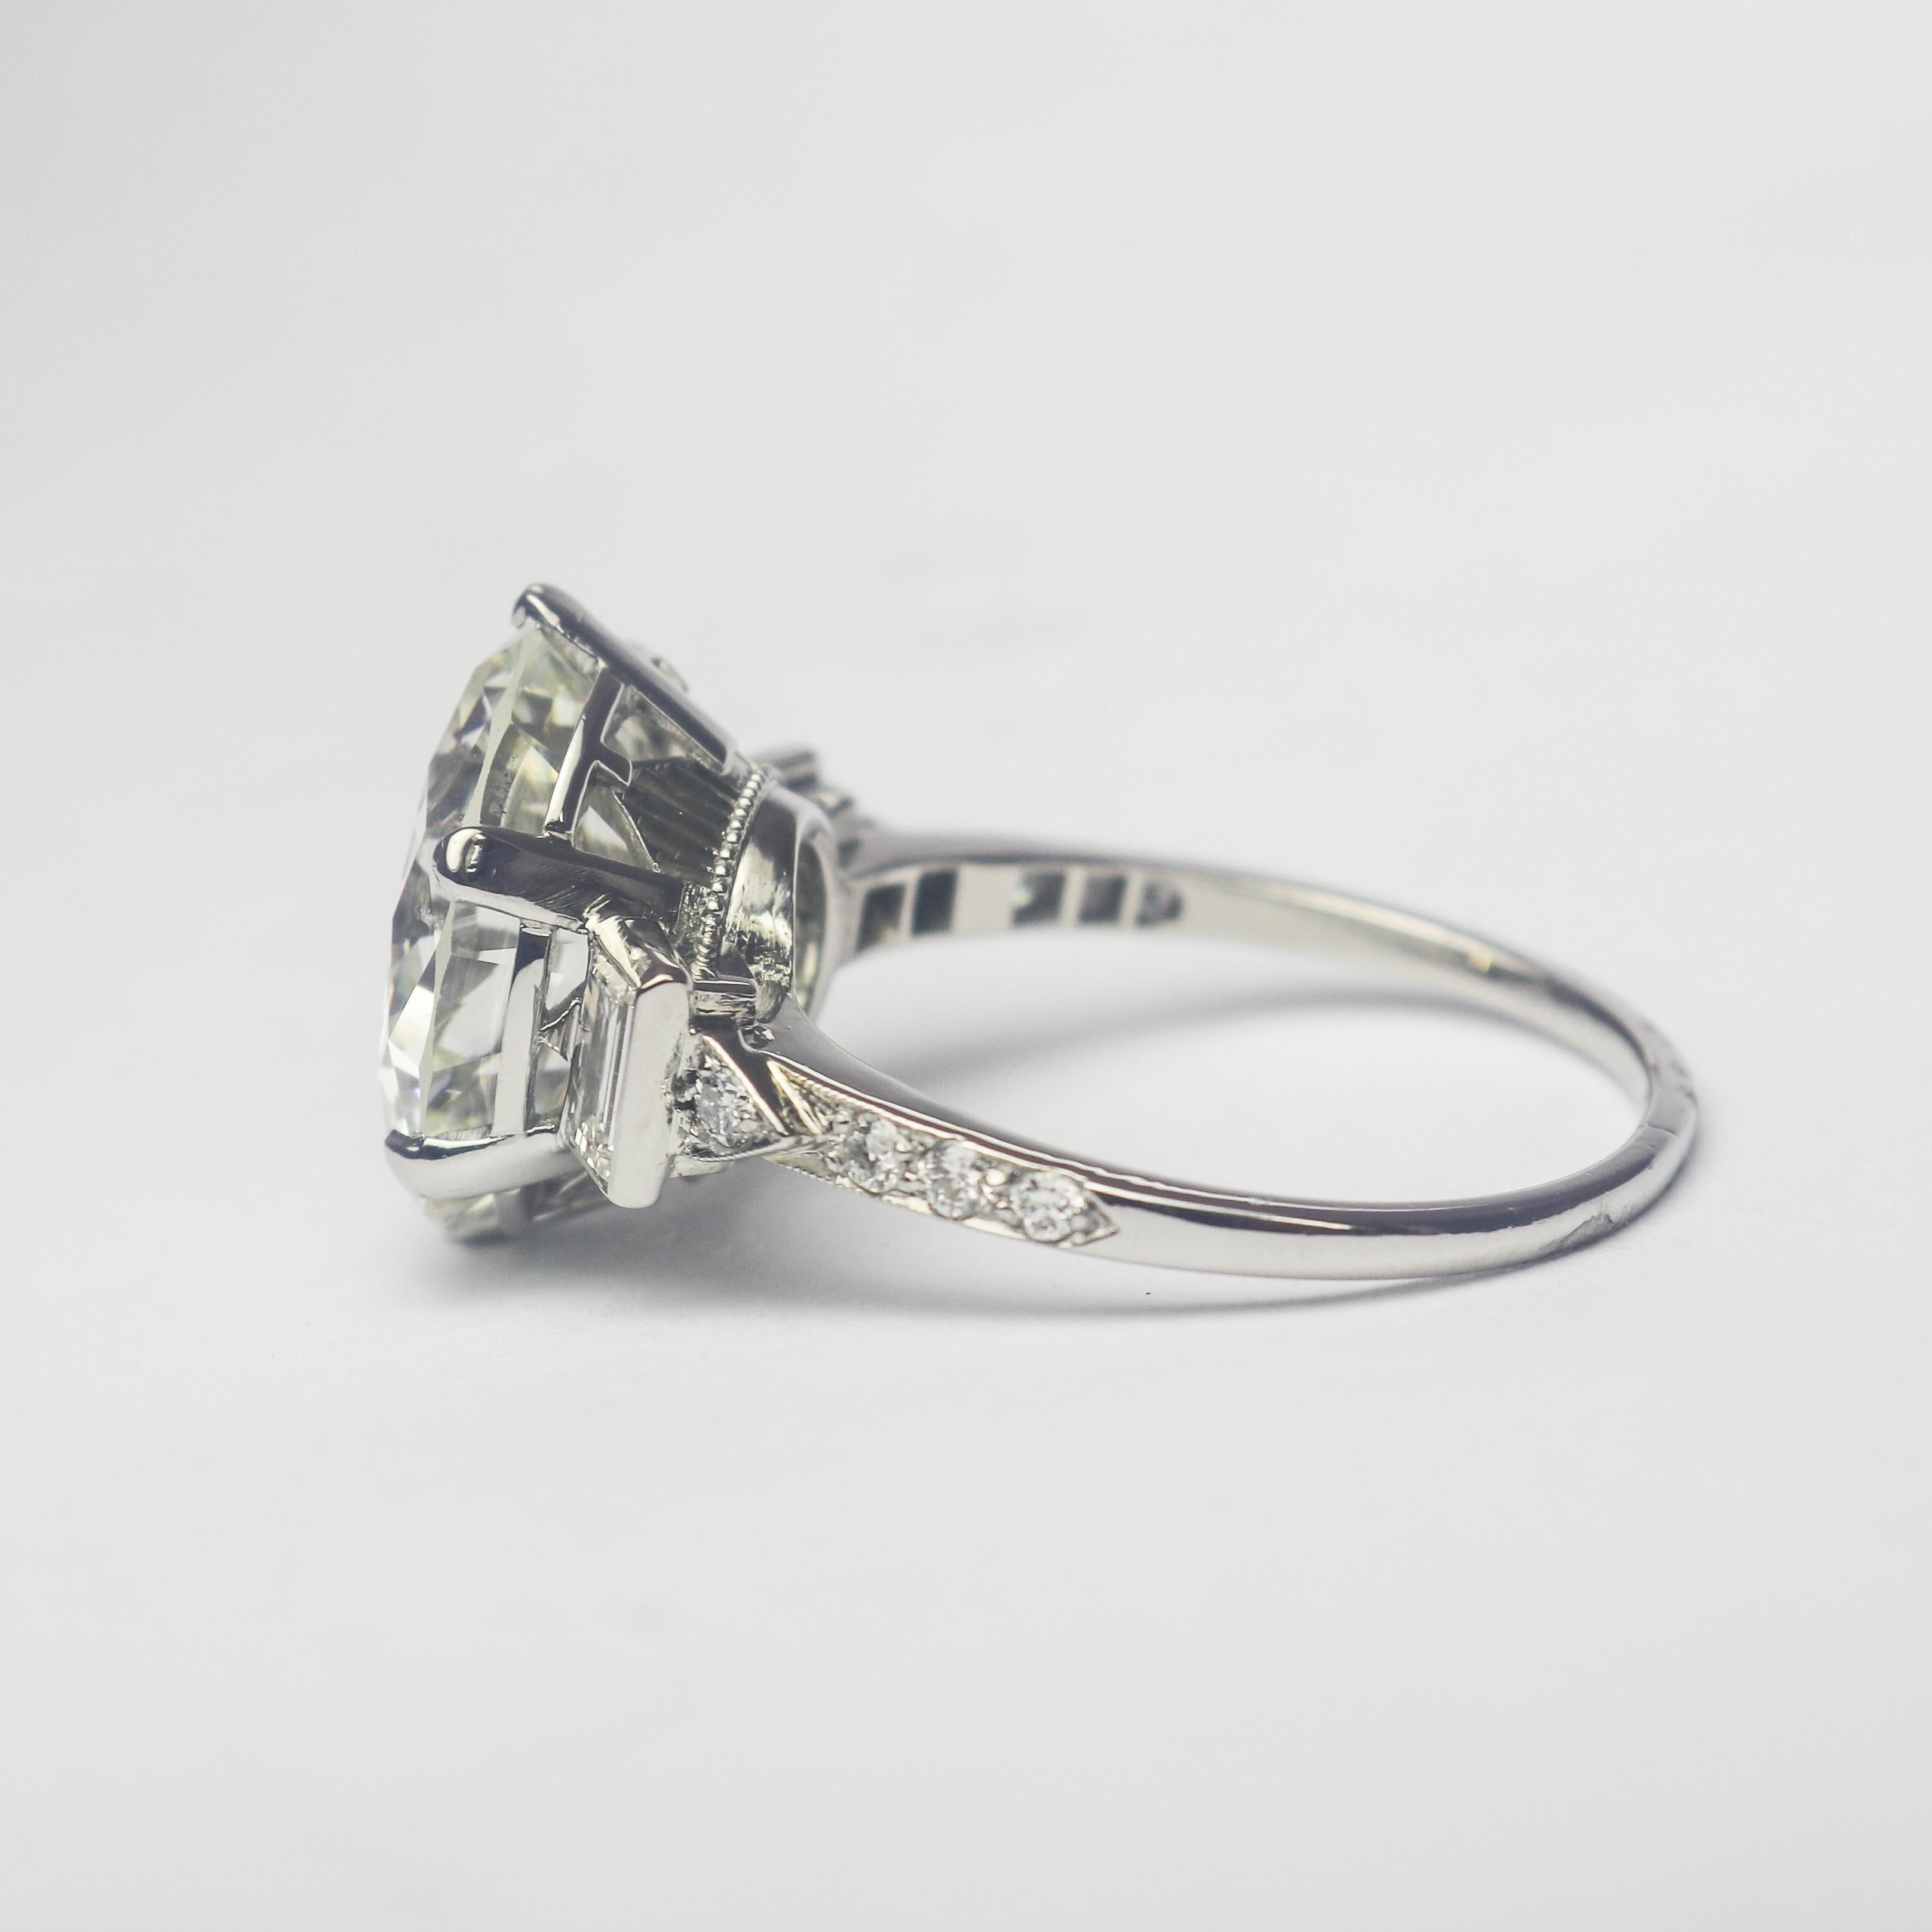 This exquisite, Art Deco style ring from the J. Birnbach workshop features a GIA certified 7.82 carat round brilliant cut diamond of J color and VS1 clarity as described by GIA grading report #5212515536. Set in a handmade, platinum ring with